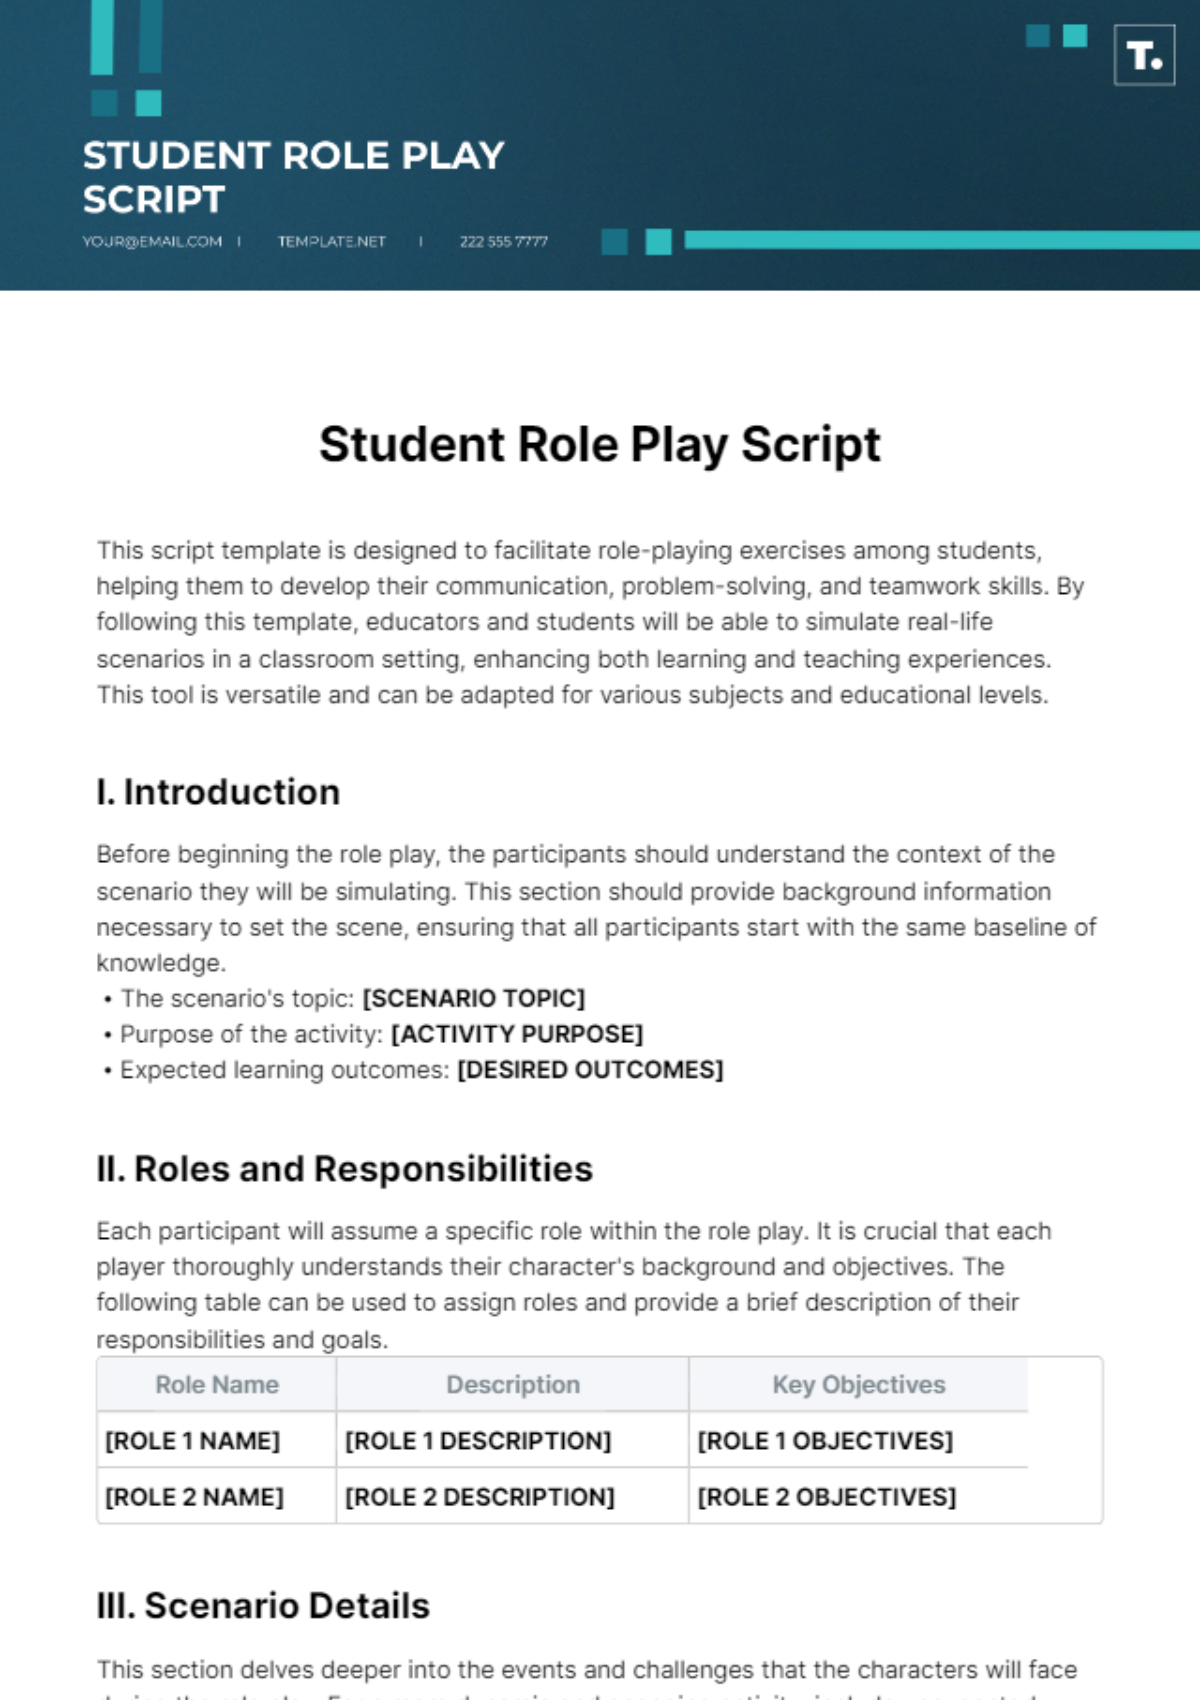 Student Role Play Script Template